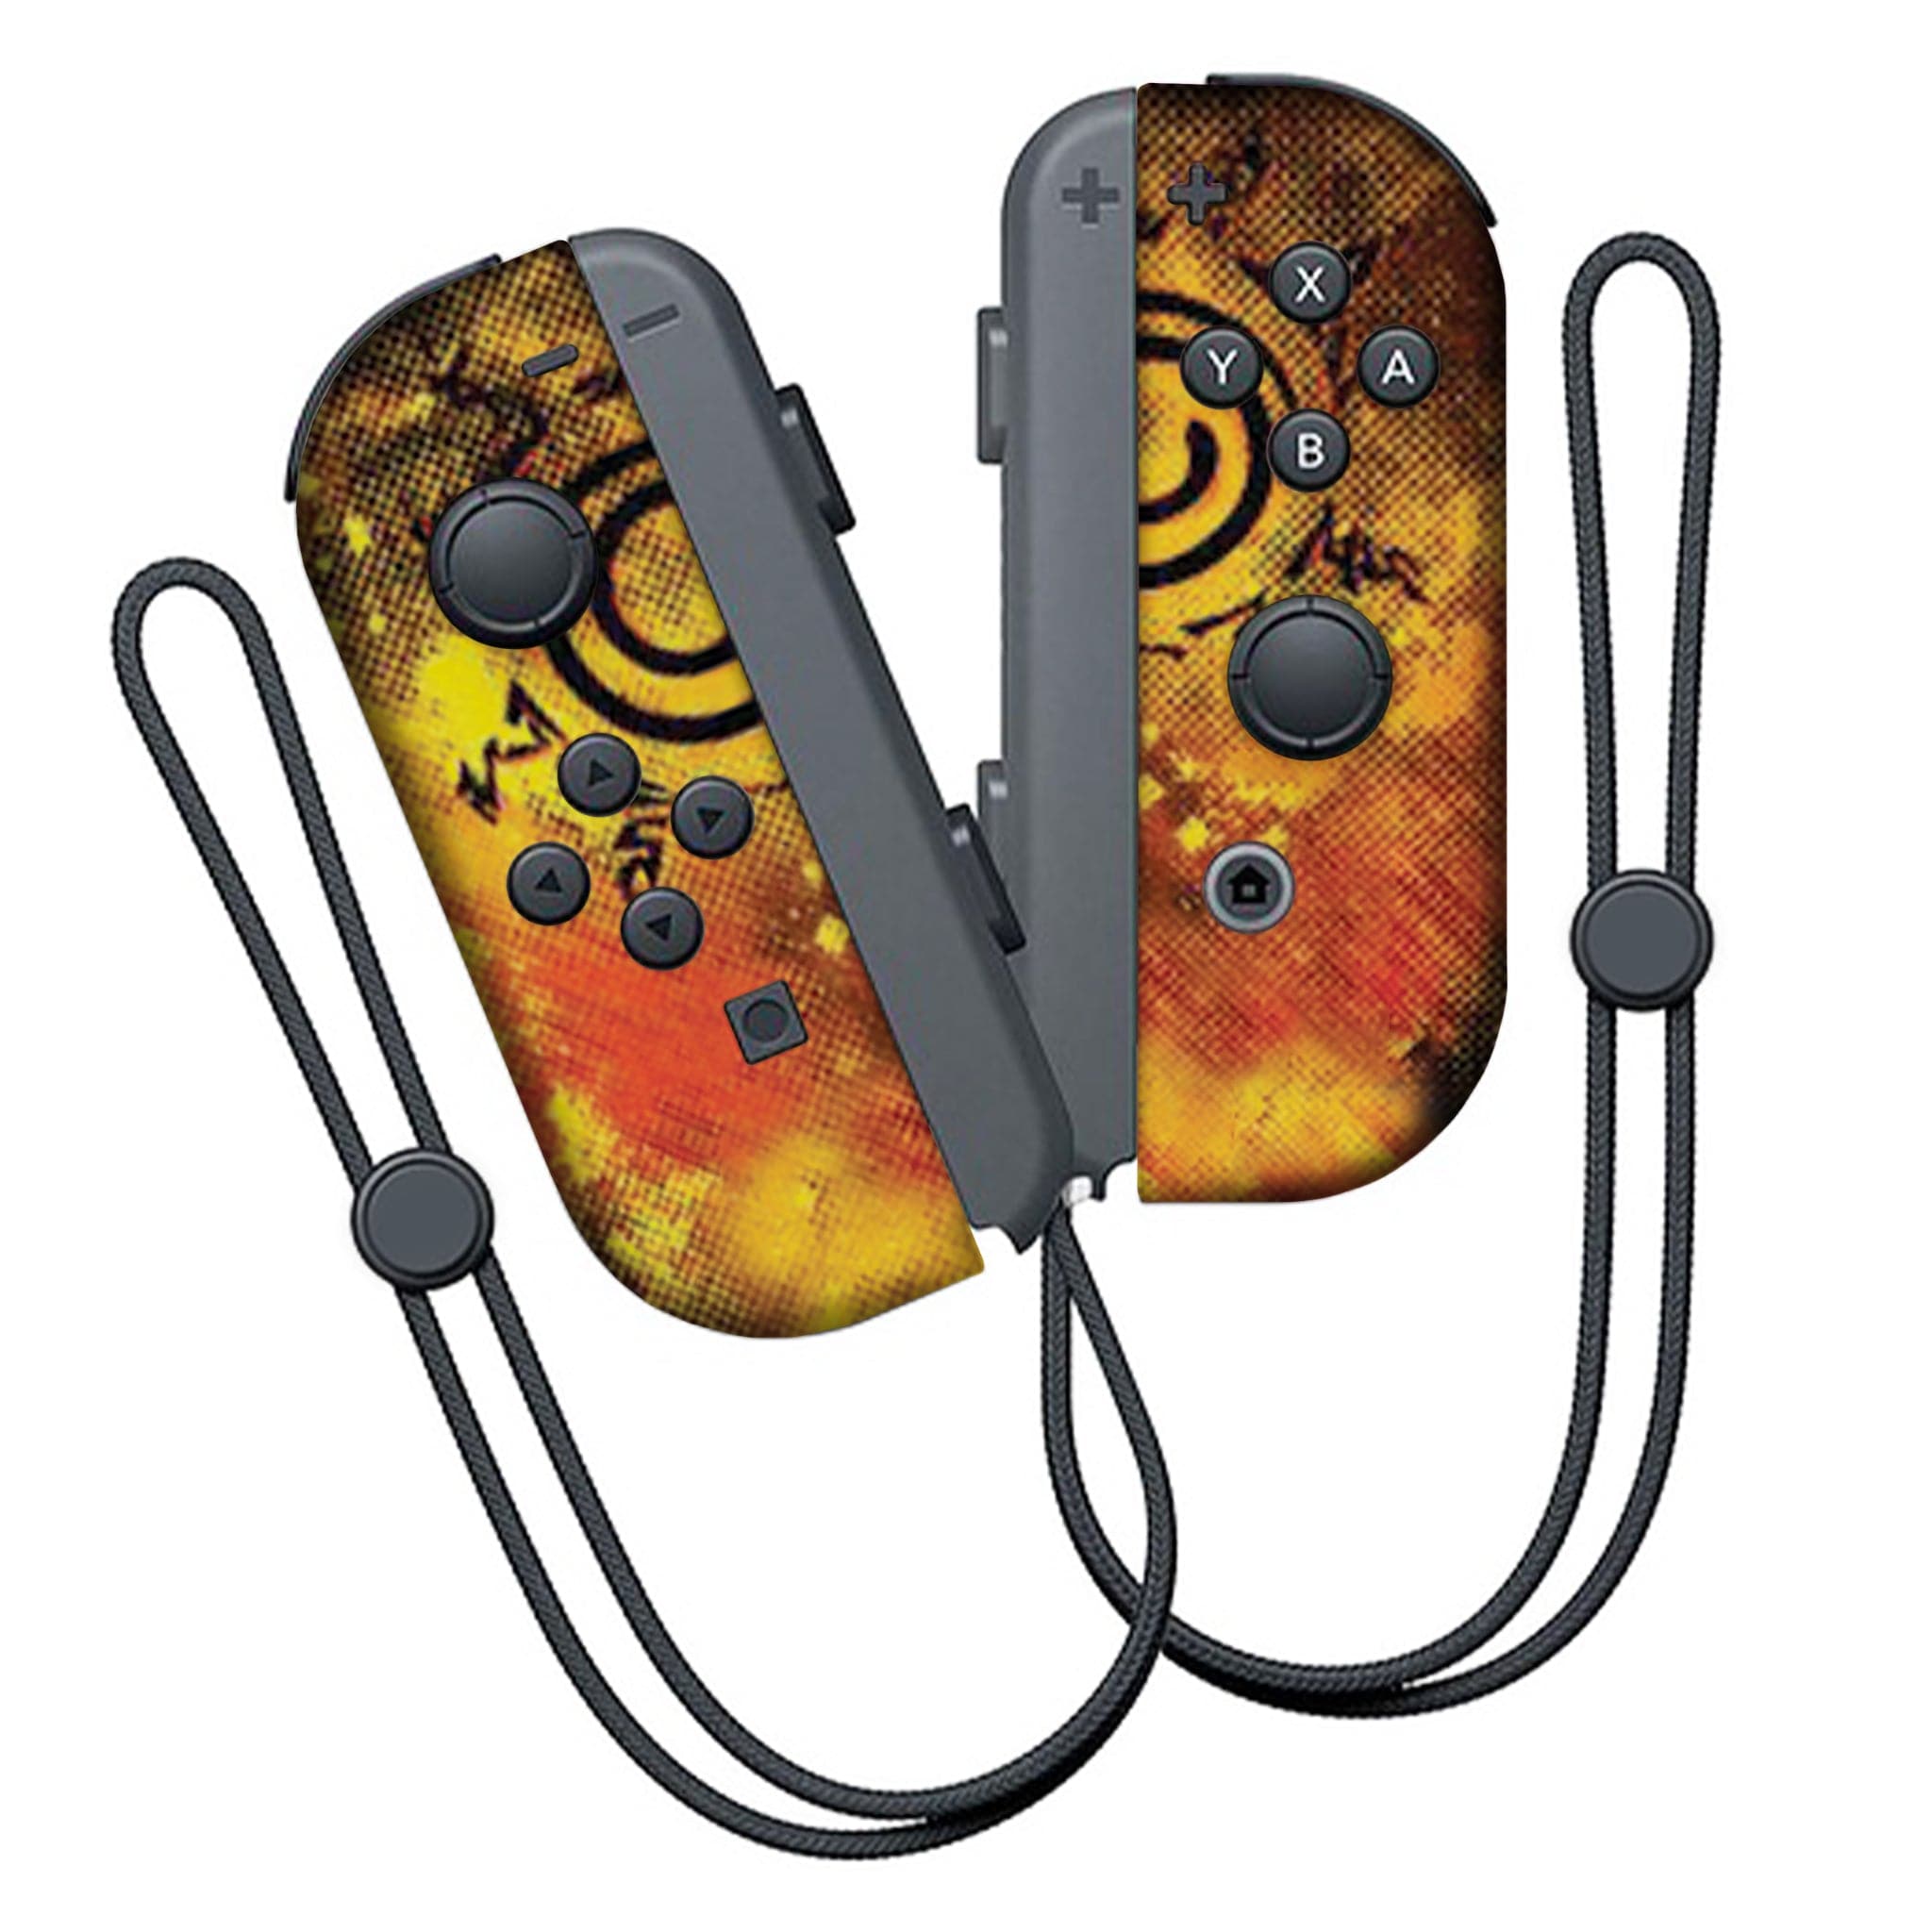 Naruto Inspired Nintendo Switch Joy-Con Left and Right Switch Controllers by Nintendo